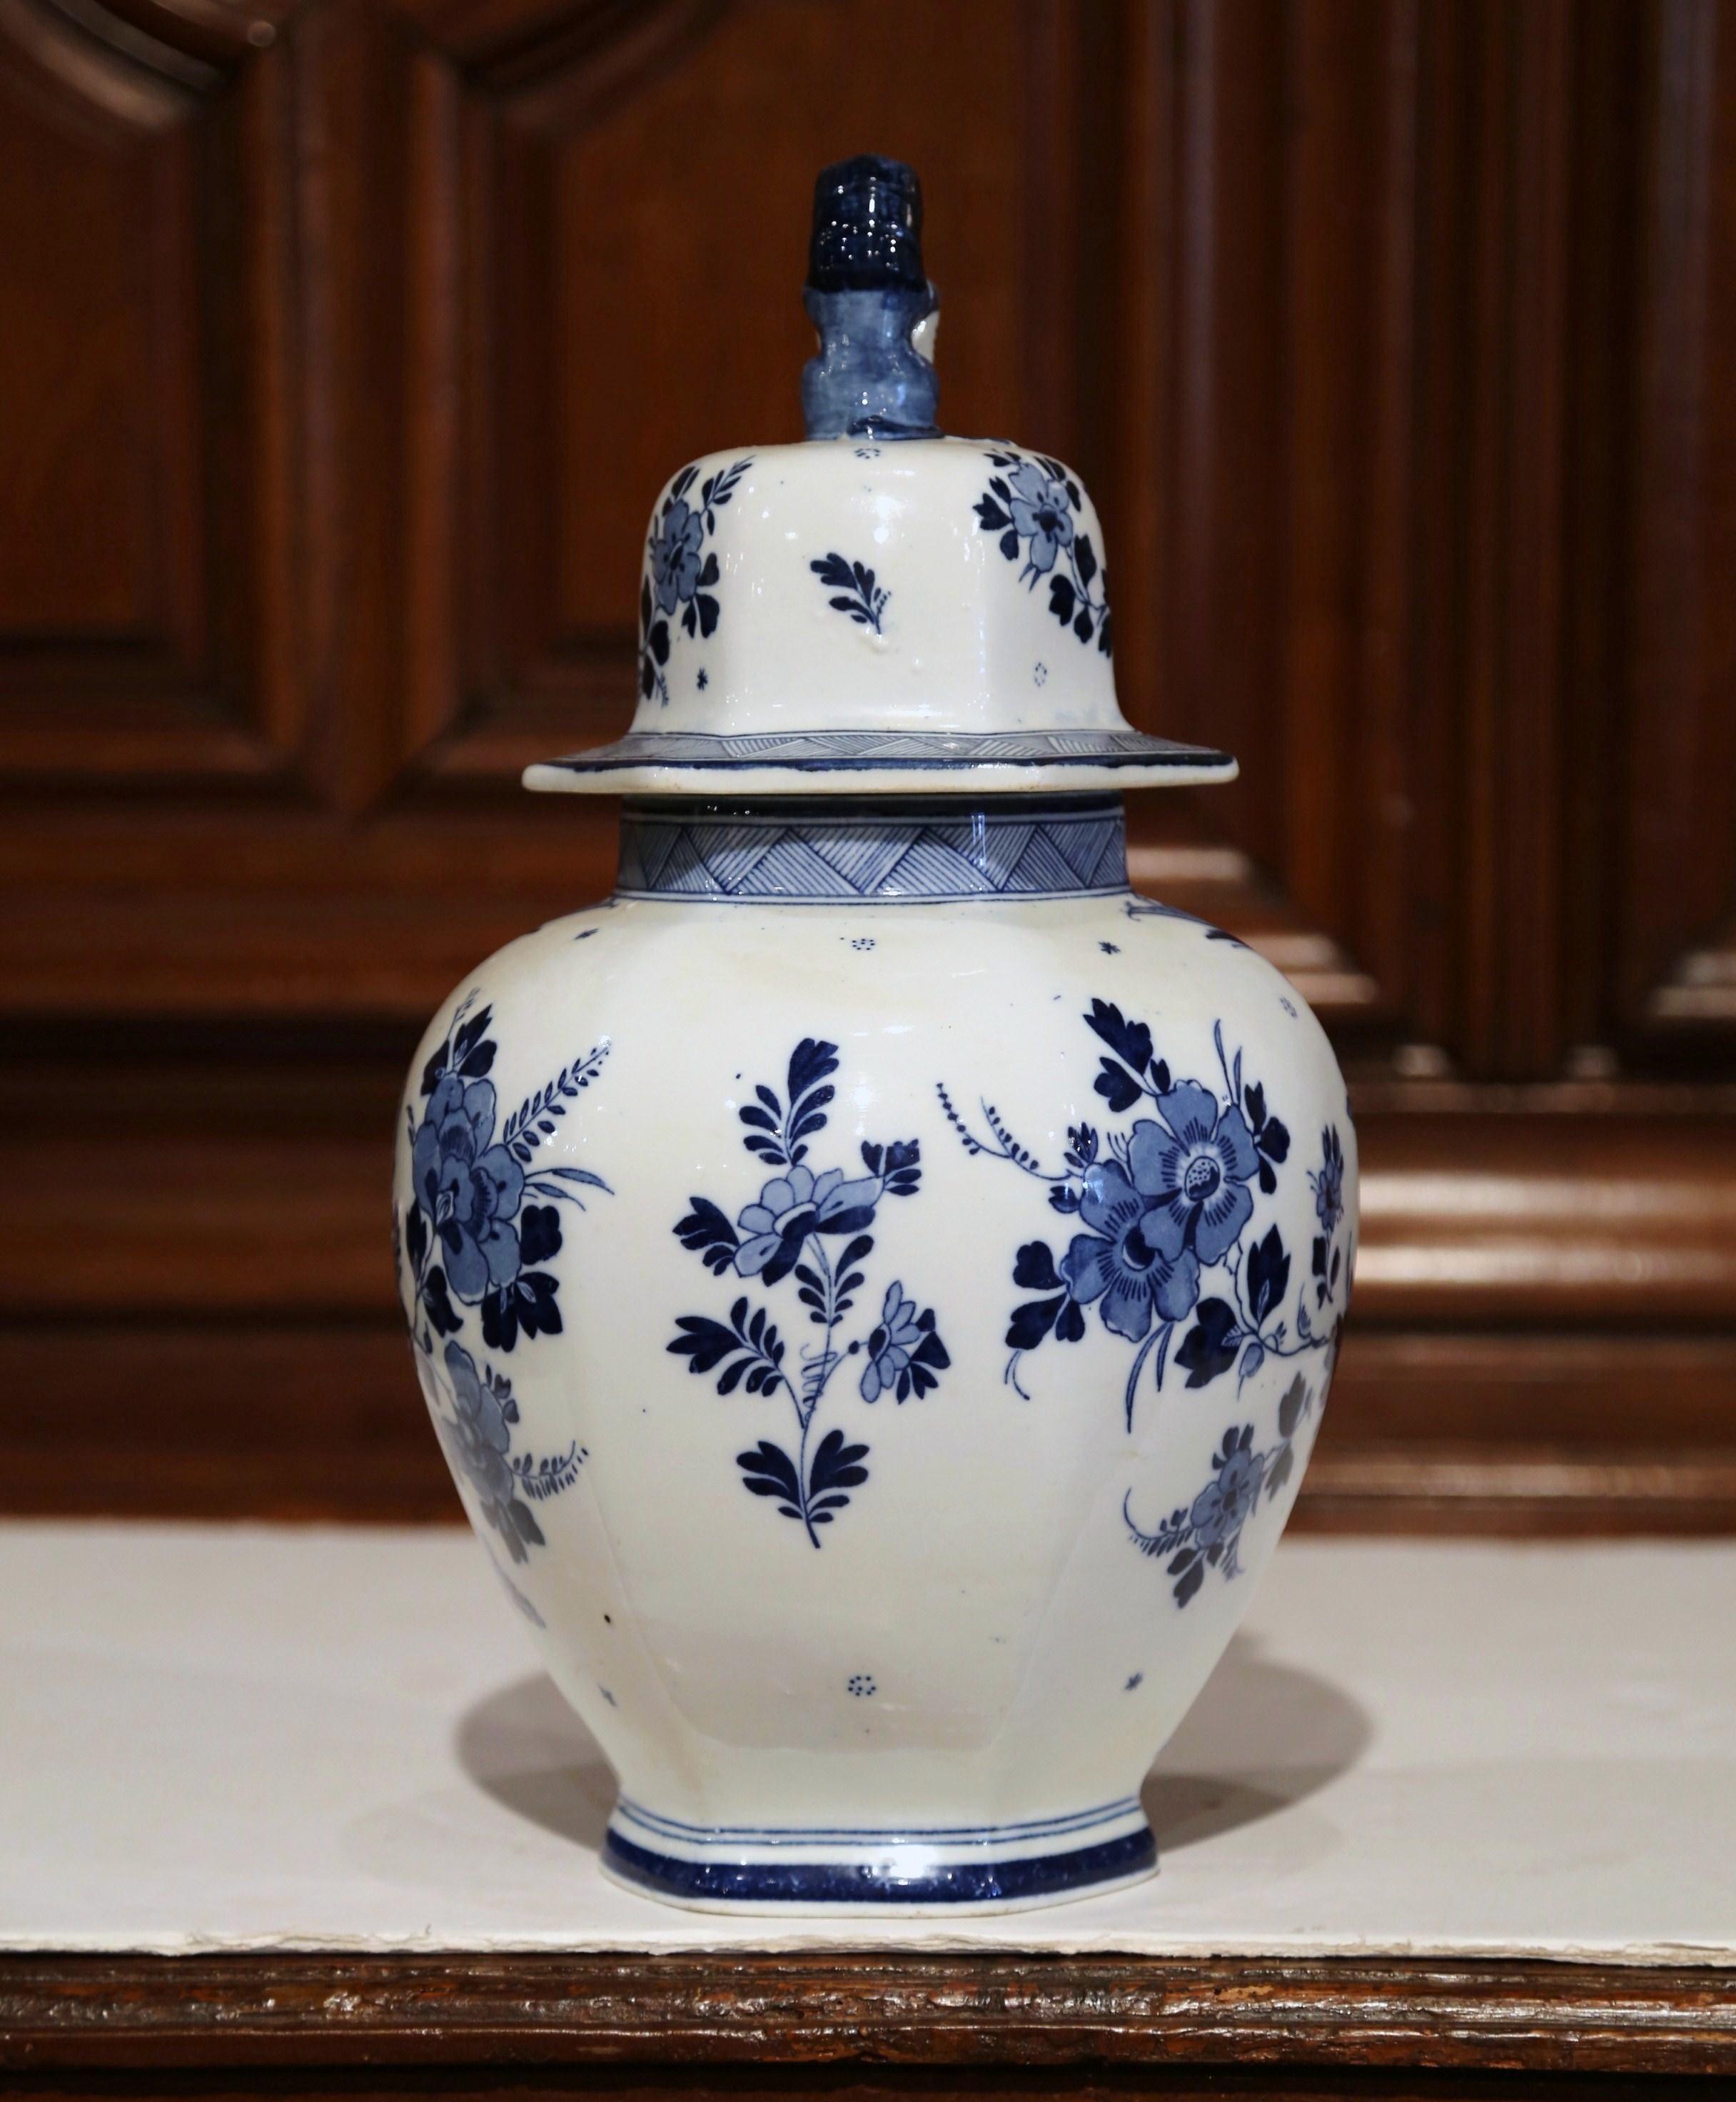 20th Century Midcentury Dutch Hand-Painted Blue and White Faience Delft Ginger Jar with Lid